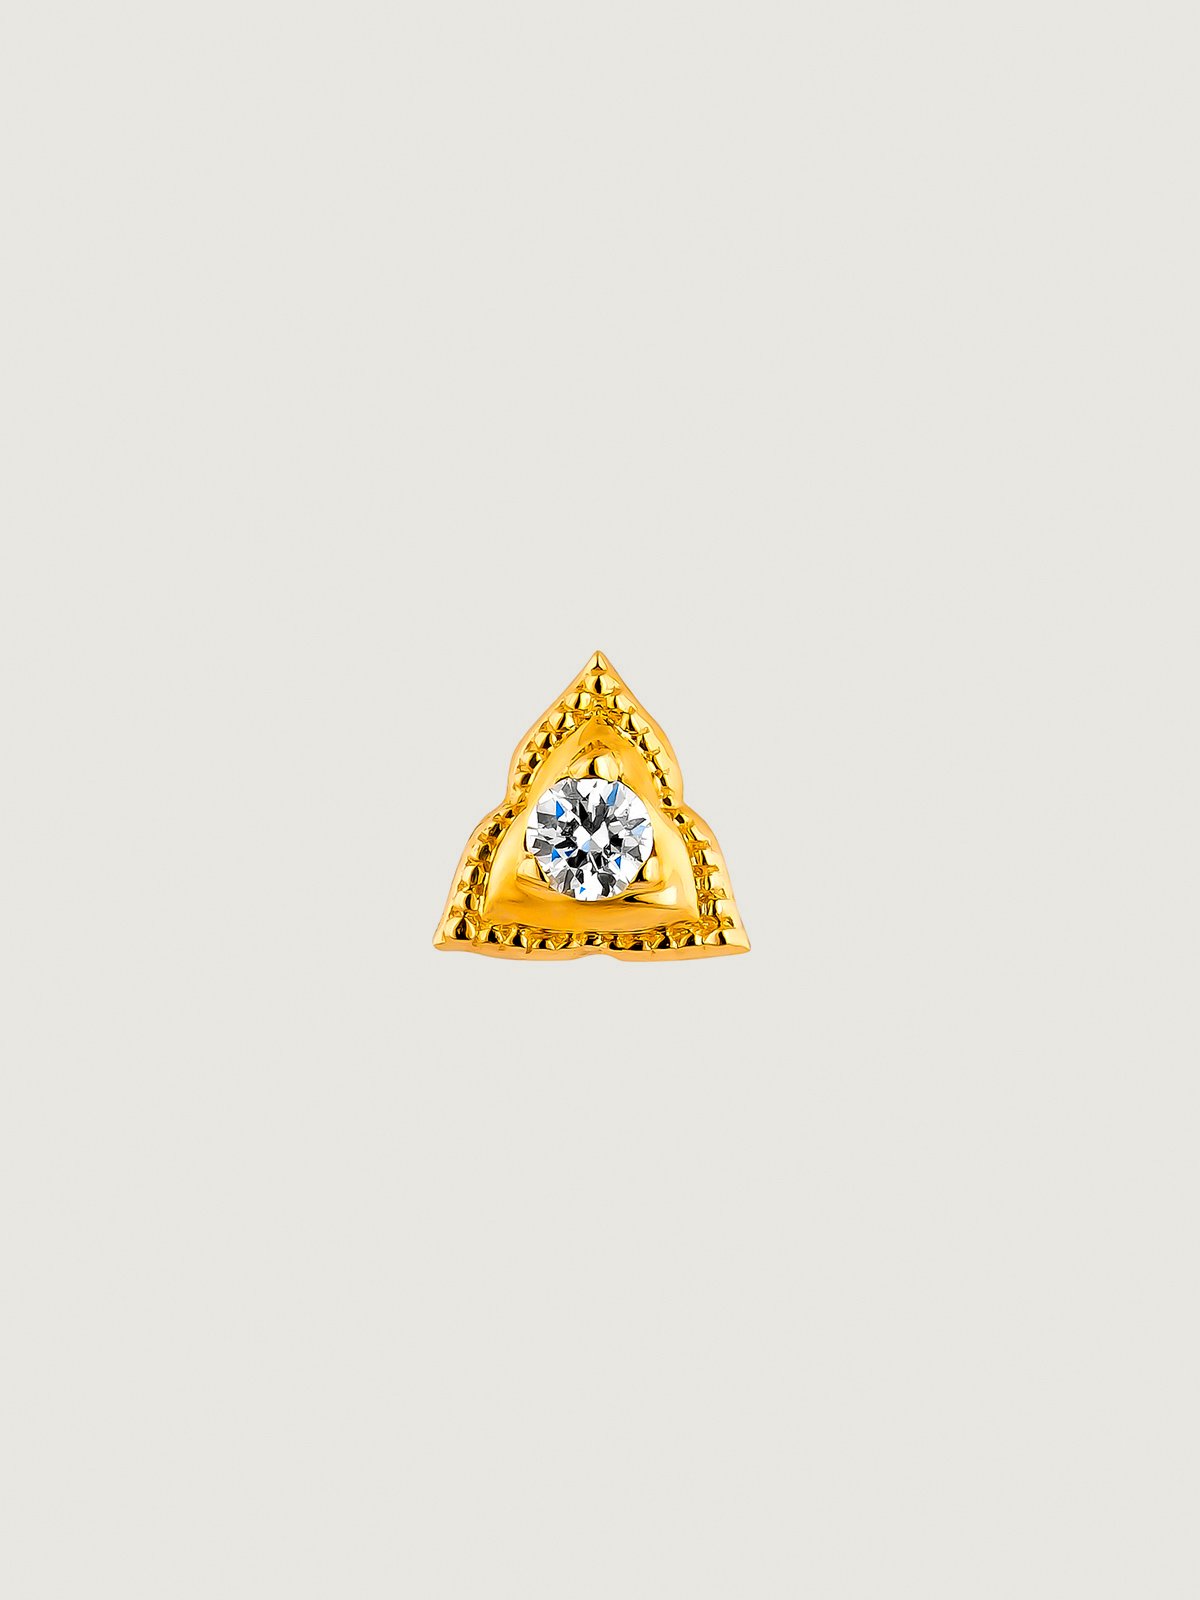 Individual 9K yellow gold earring with diamond in a triangle shape.